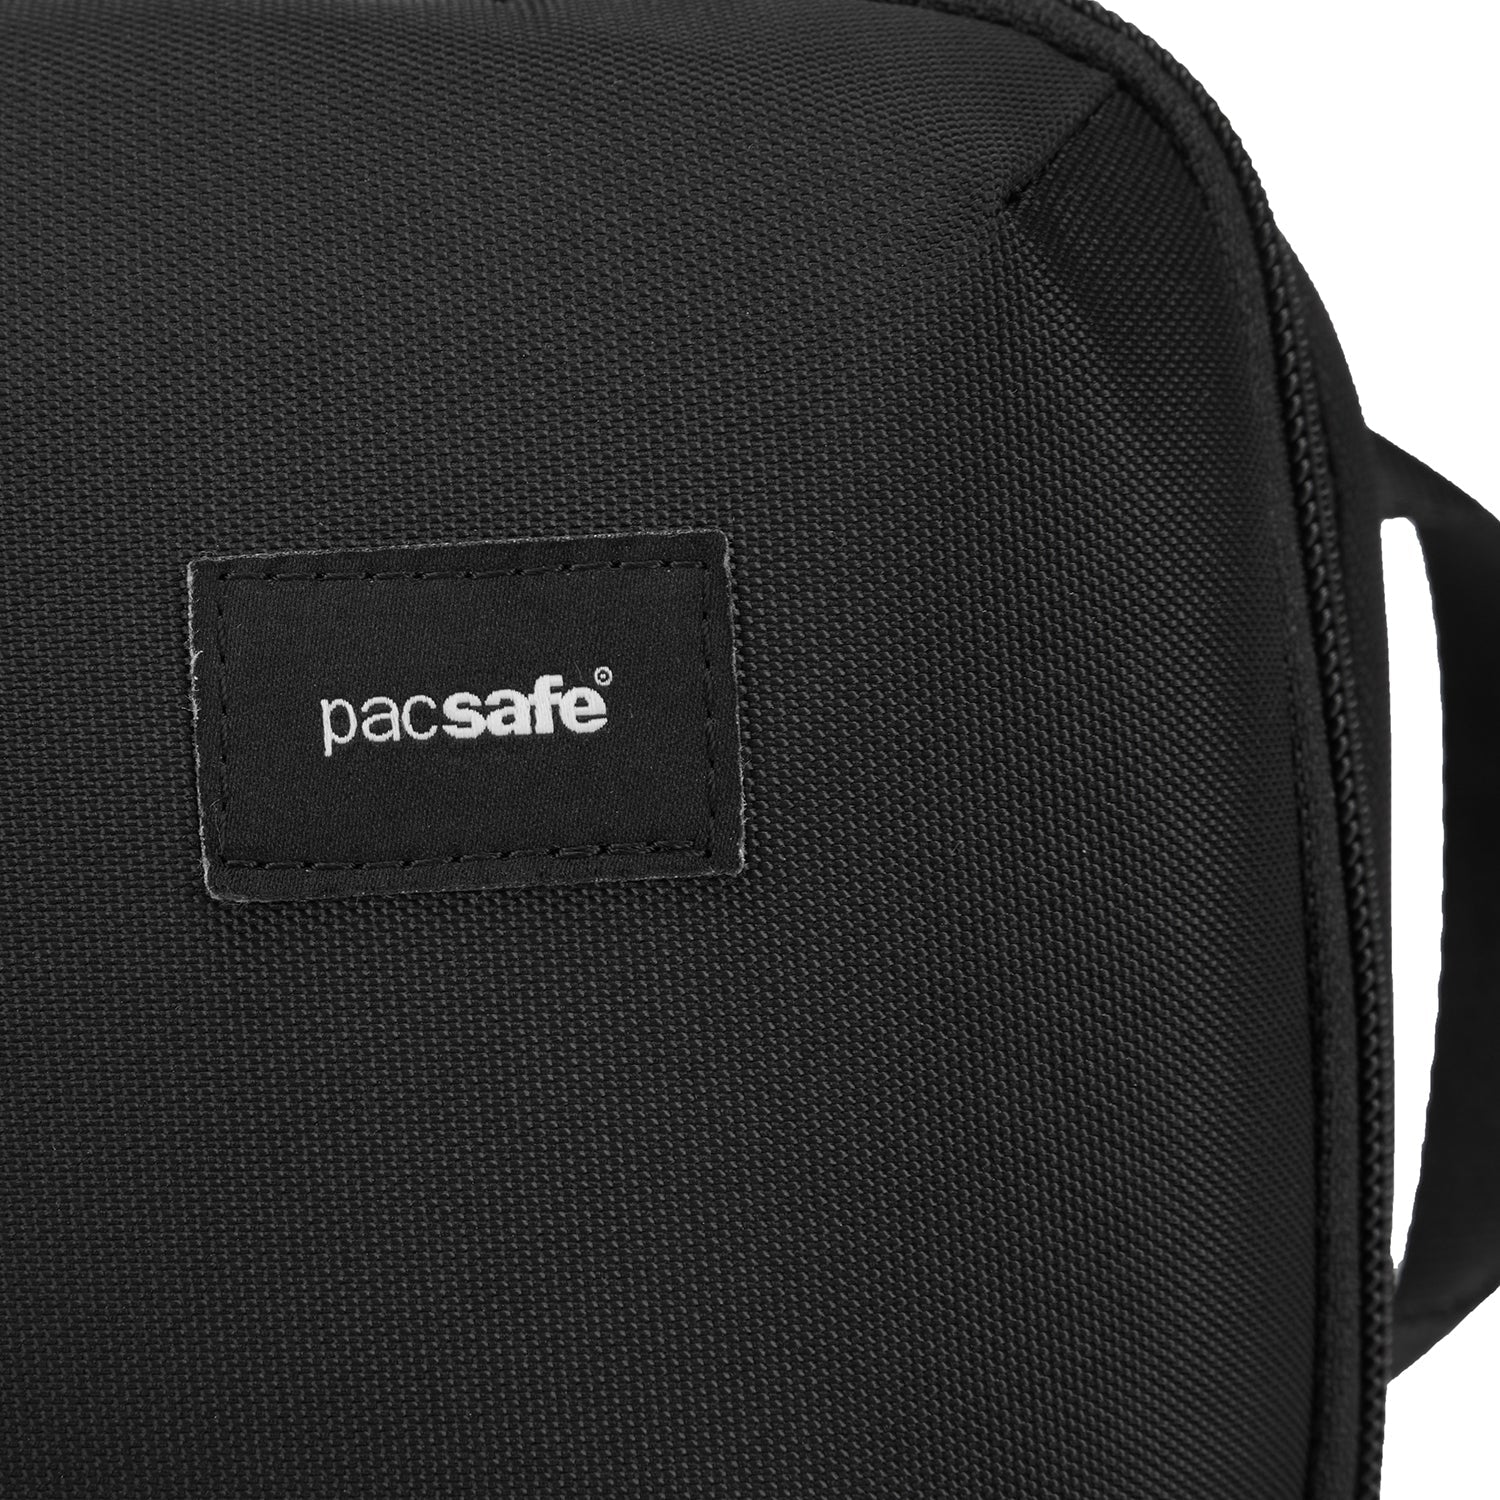 Coversafe Under Clothing Money Pouches, RFID Blocking Belts Pacsafe Tagged  womens - Pacsafe – Official APAC Store